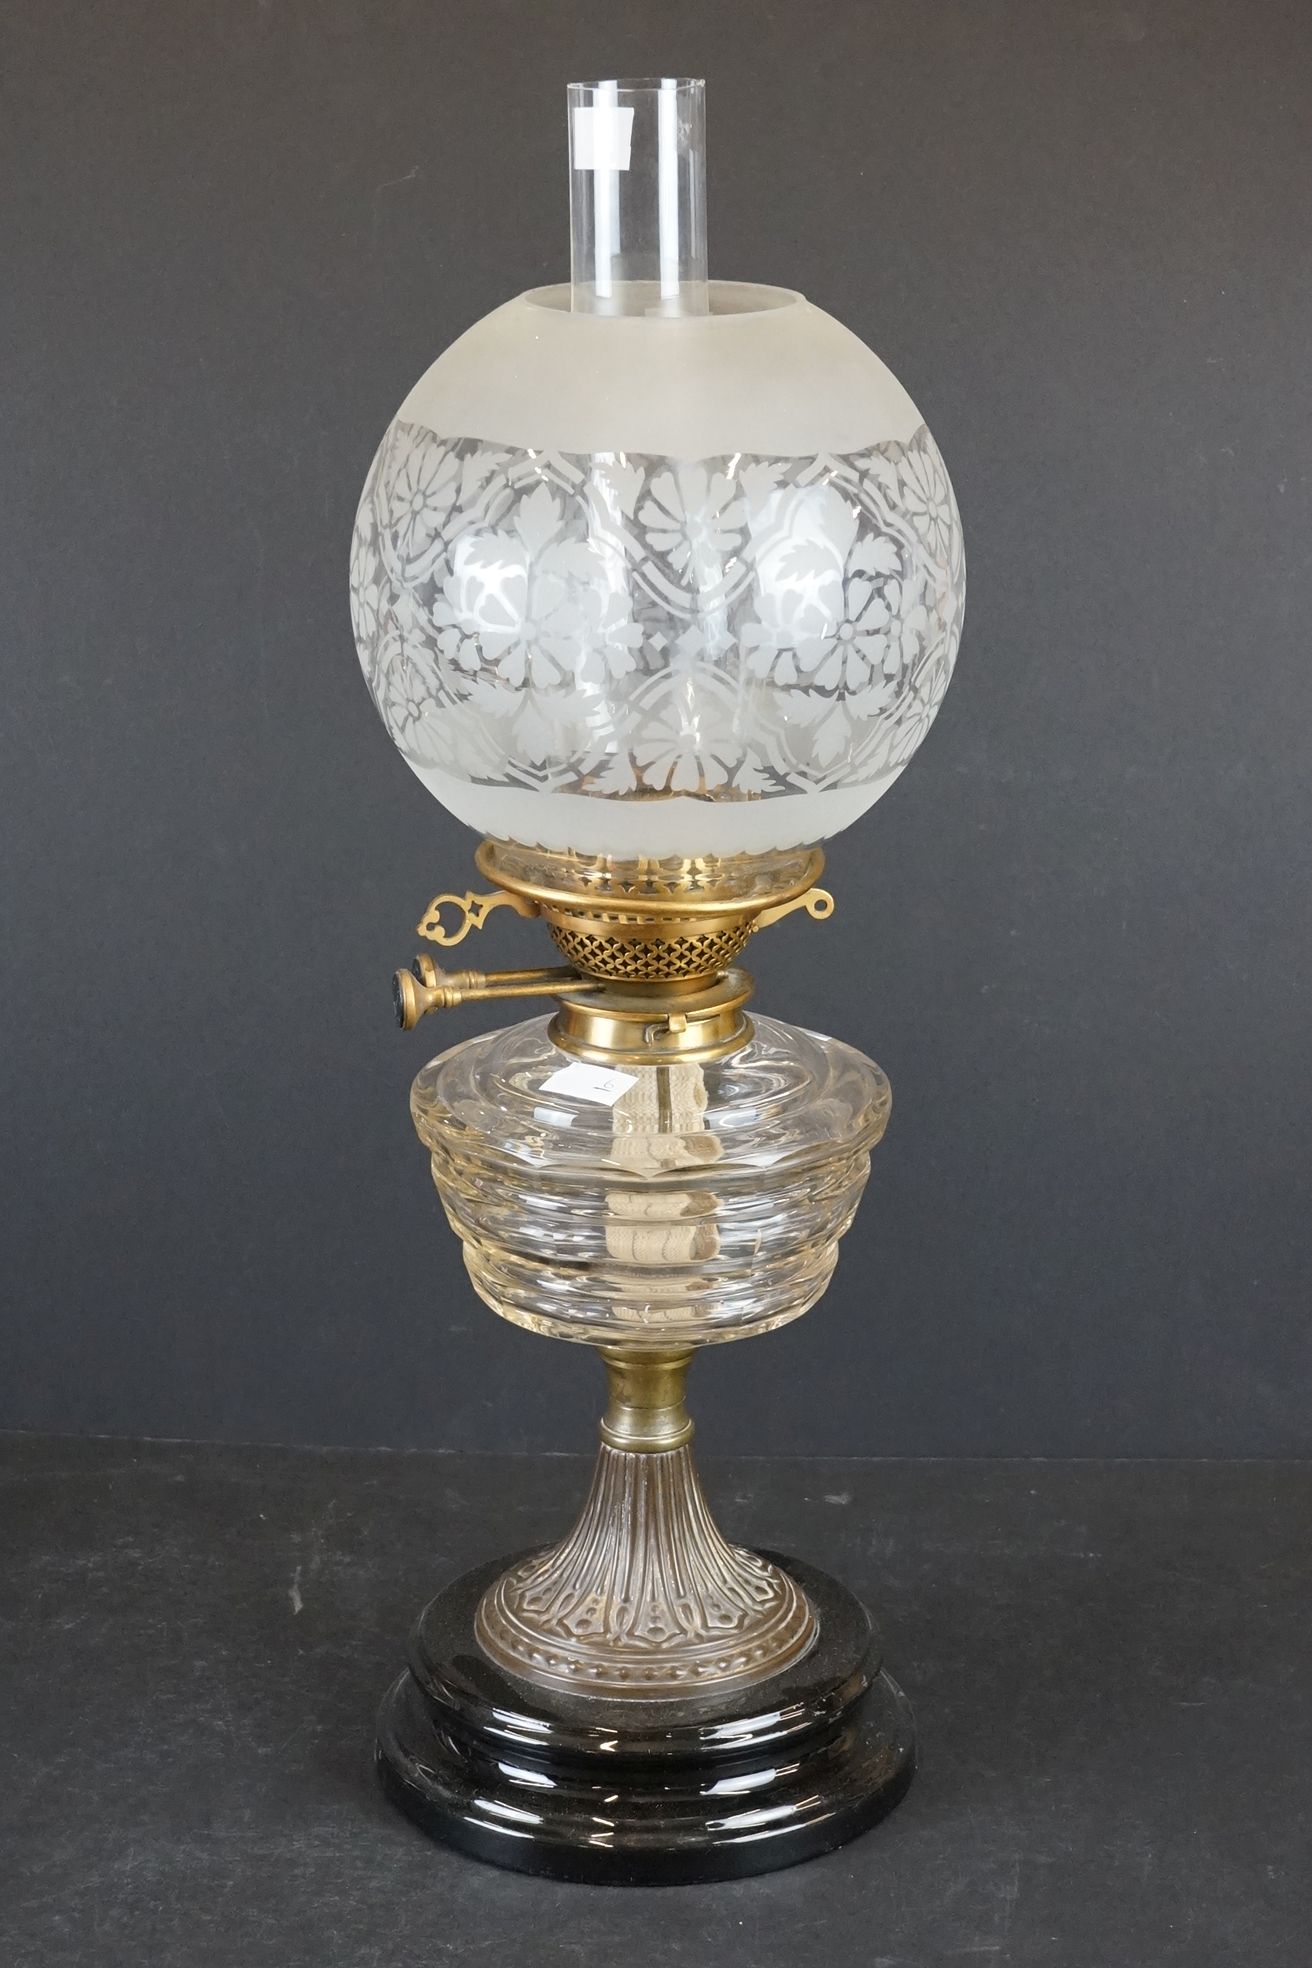 Late 19th / Early 20th century oil lamp with clear cut glass layered pattern font, brass base with